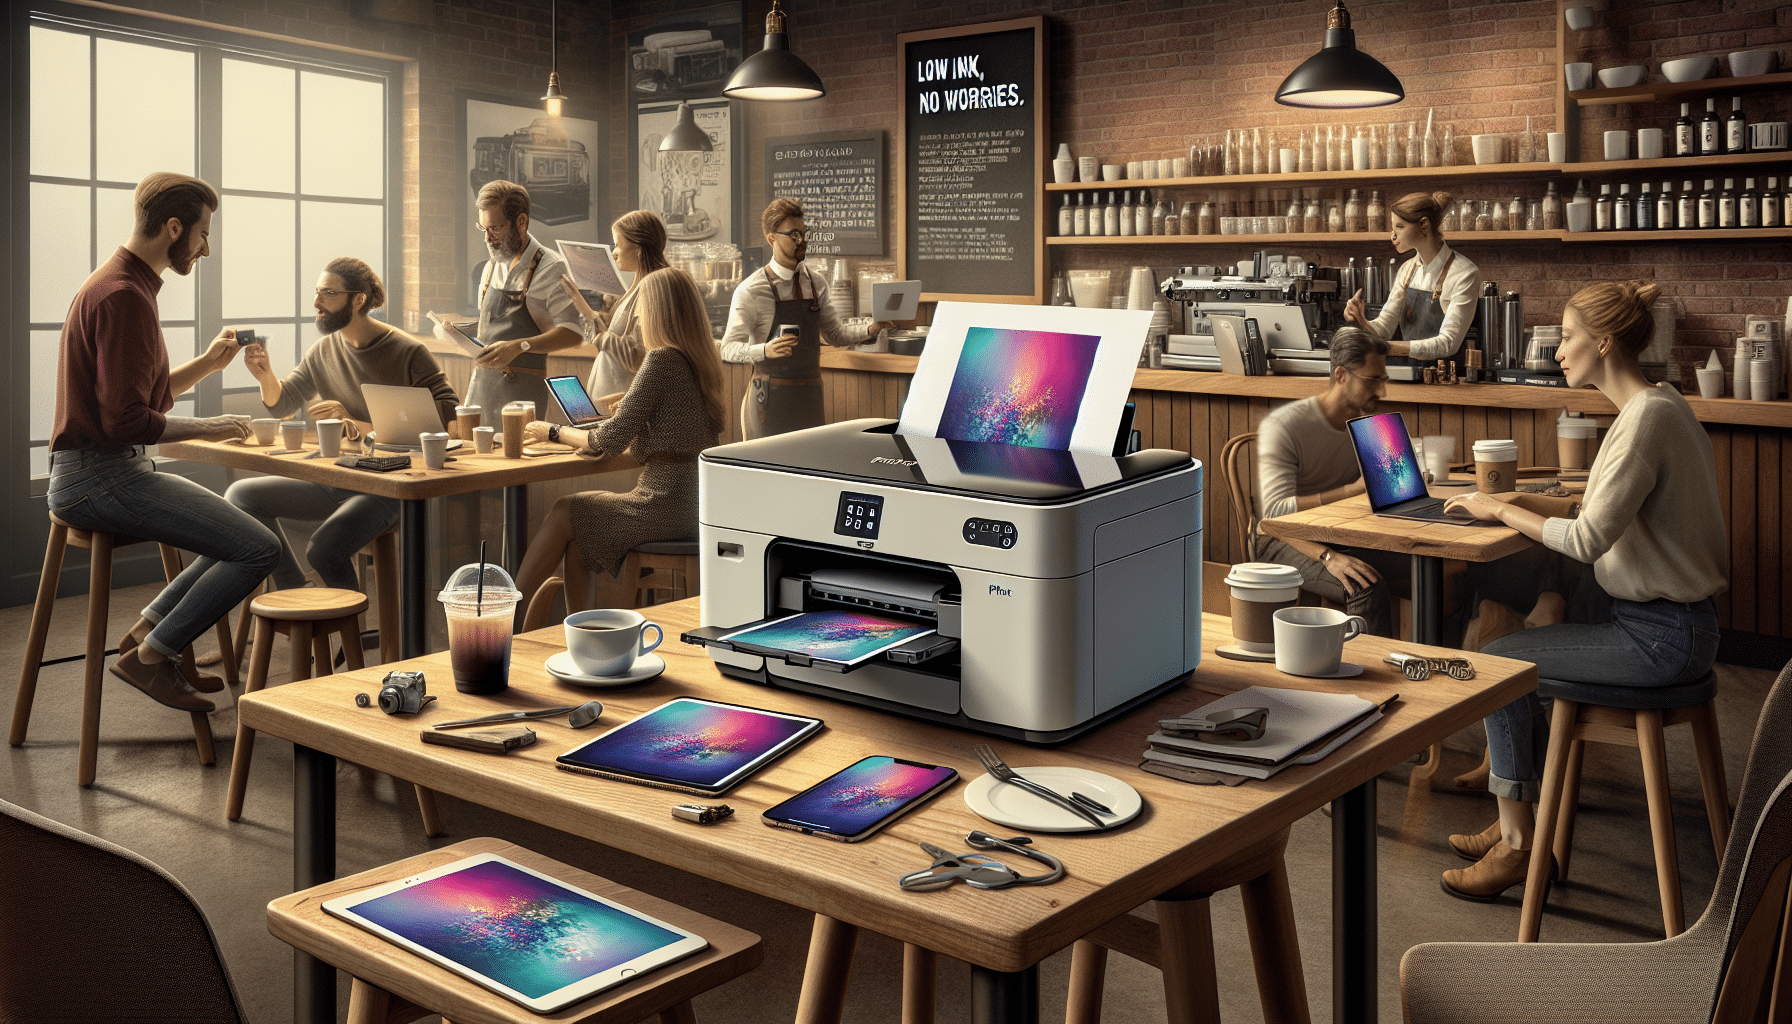 Bustling coffee shop scene featuring HP Instant Ink printer